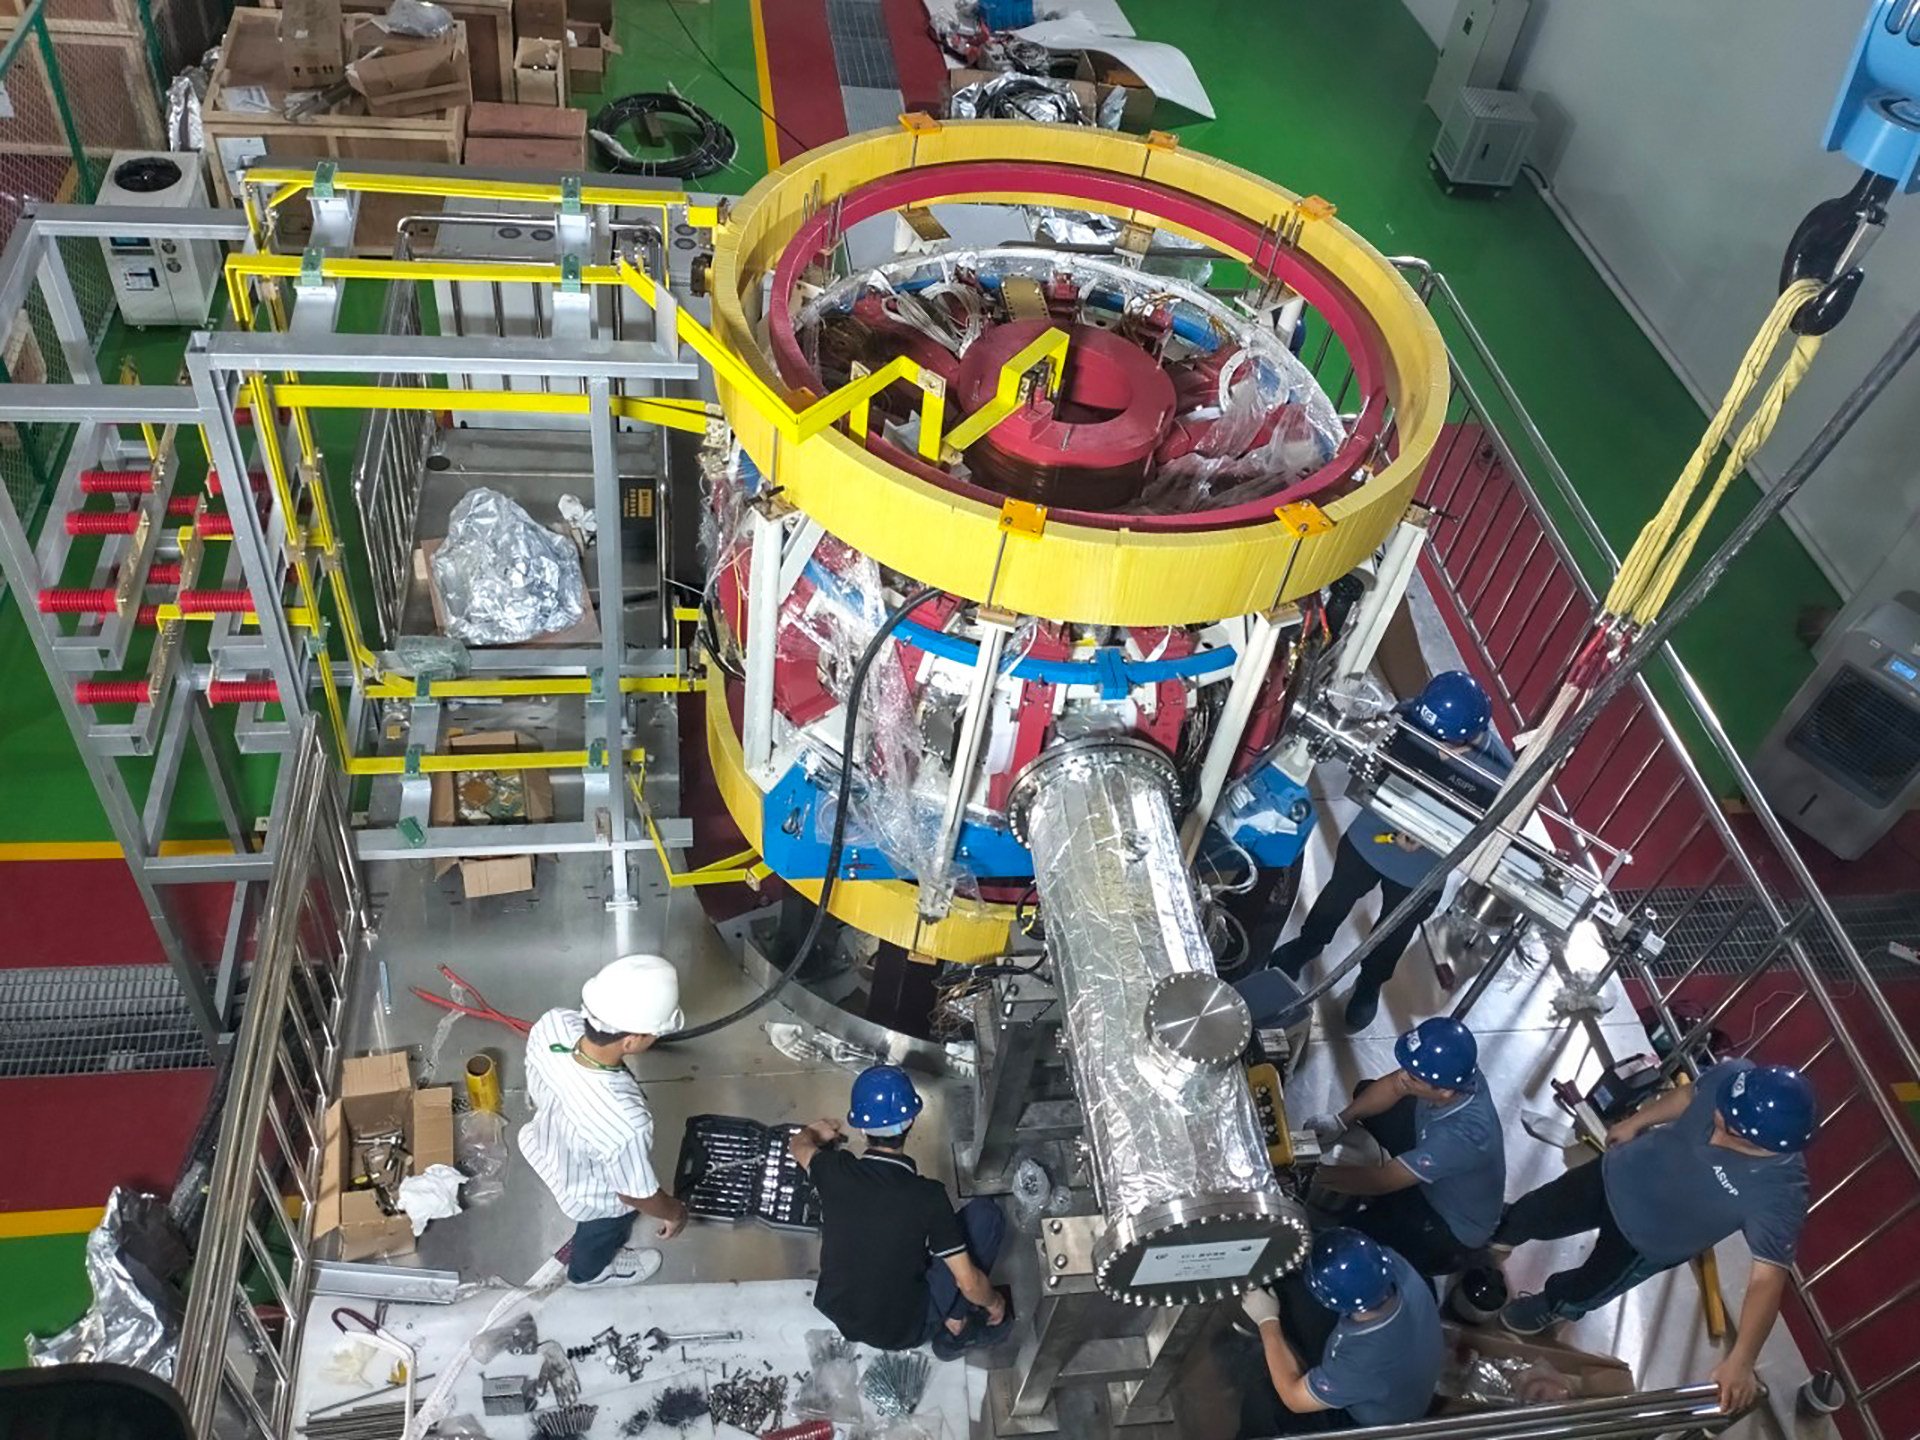 Chinese and Thai scientists work together to assemble and install the Thailand Tokamak-1. Photo: Handout